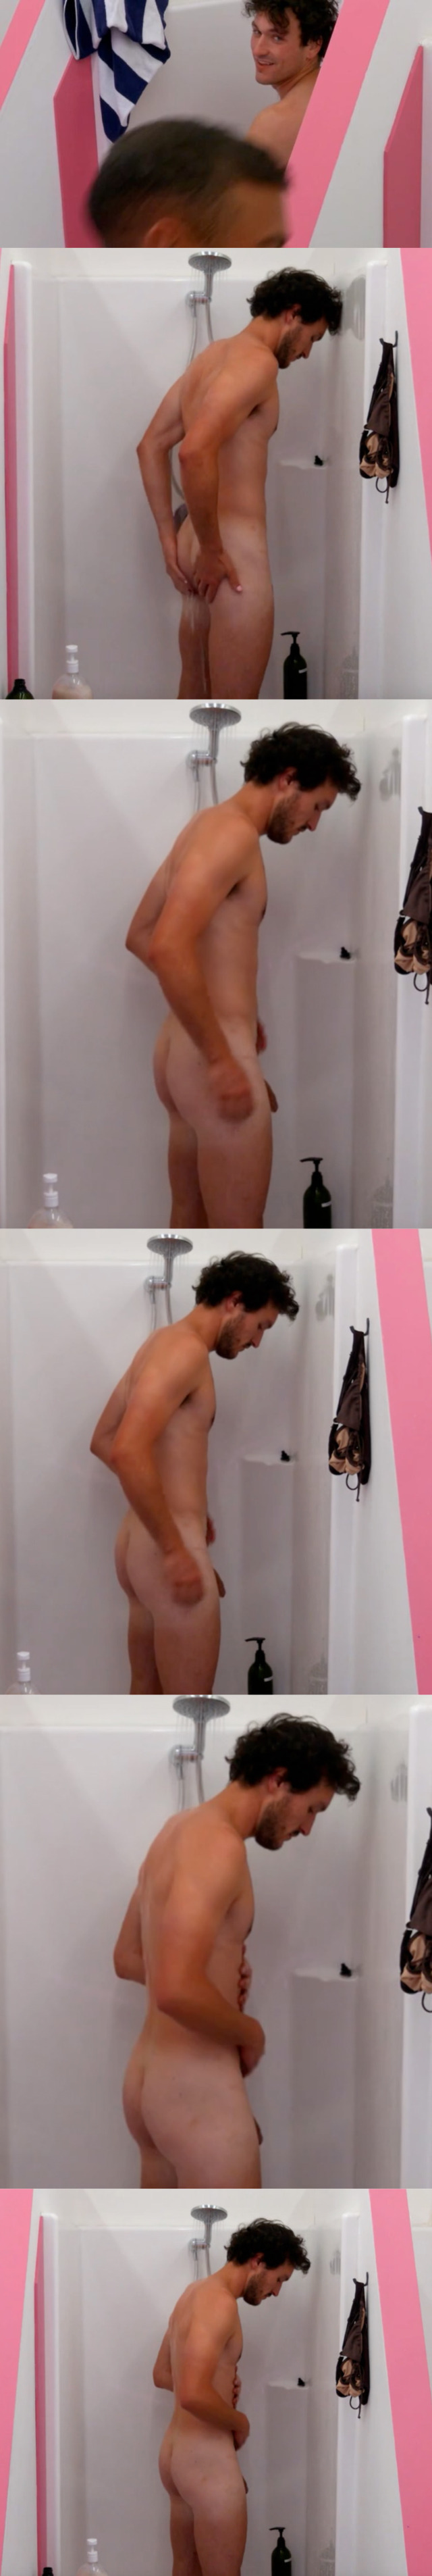 Lewis Beers completely naked in the shower at Big Brother Australia